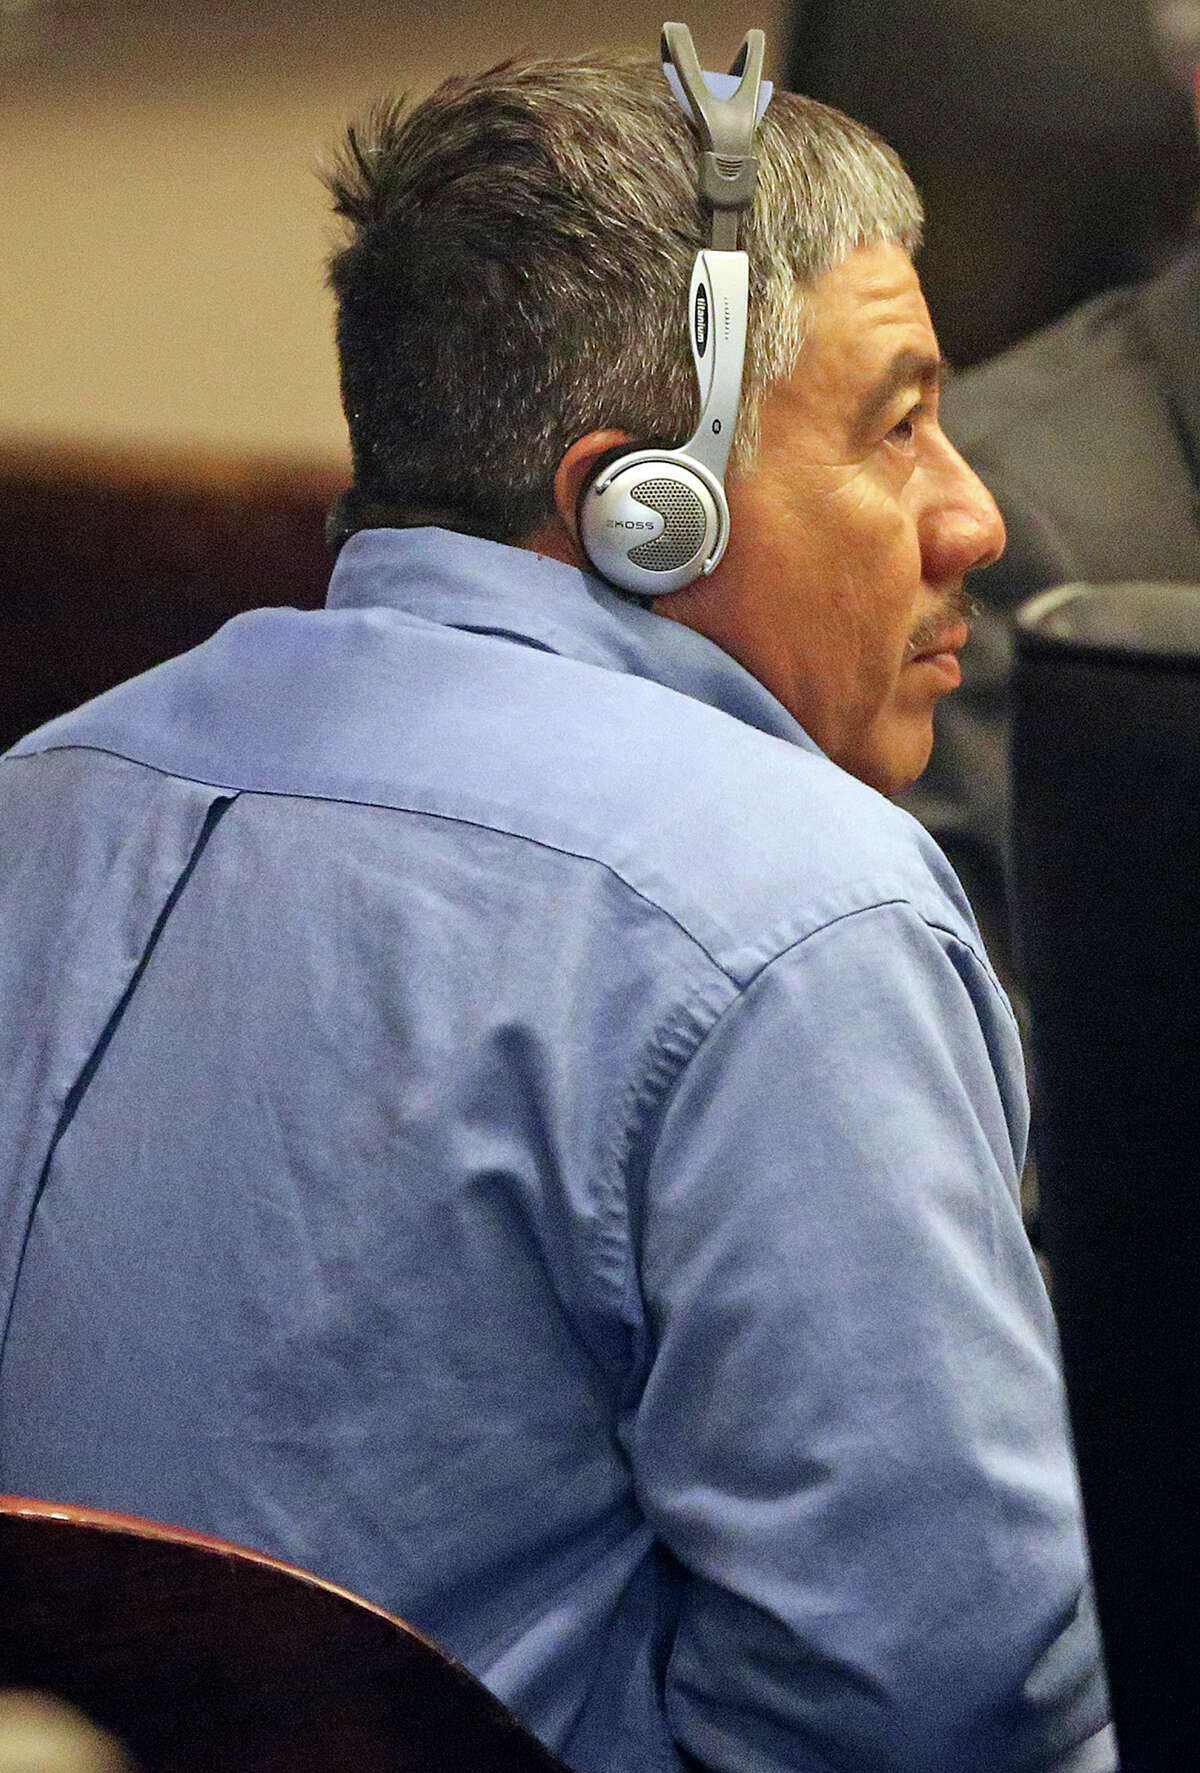 Paulino Flores, accused of murder, listens to language interpretation as he appears in the 144thth District Court at the beginning of proceedings of his trial on April 2, 2014.